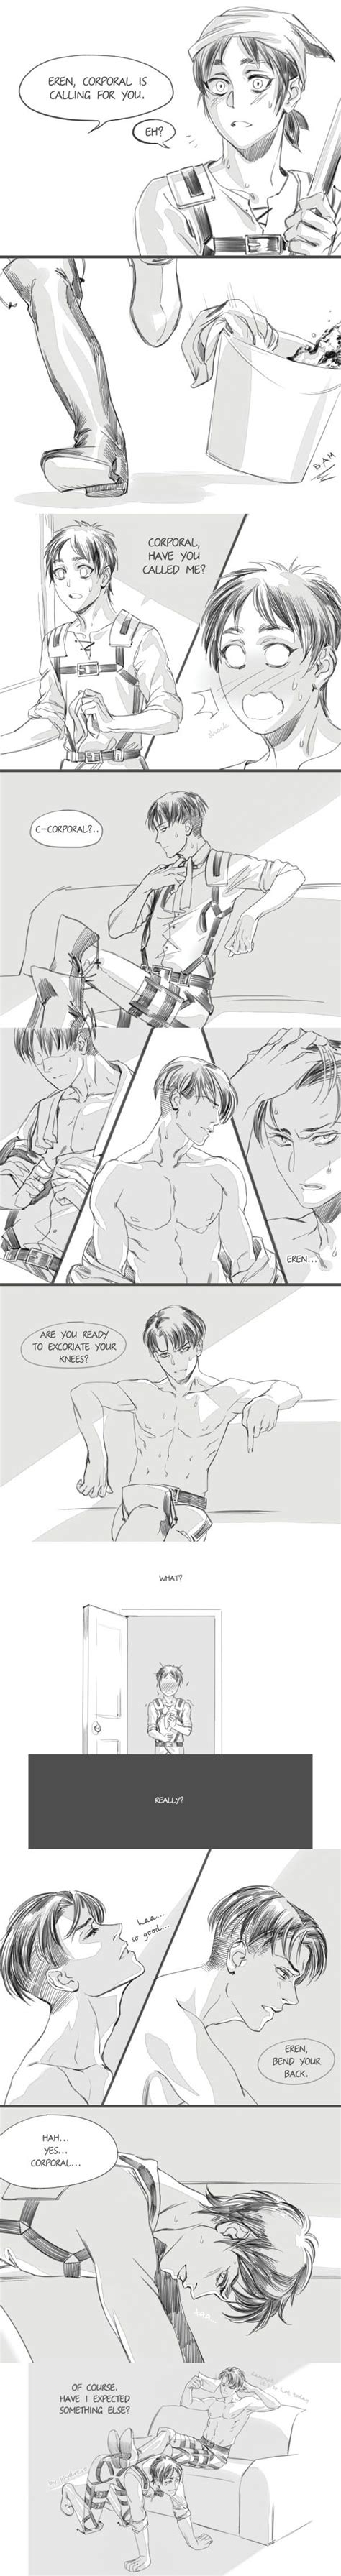 Eren's eyes widened with confusion as he awaited confirmation. ((This Eren and Levi comic wasn't smut as I expected. It ...